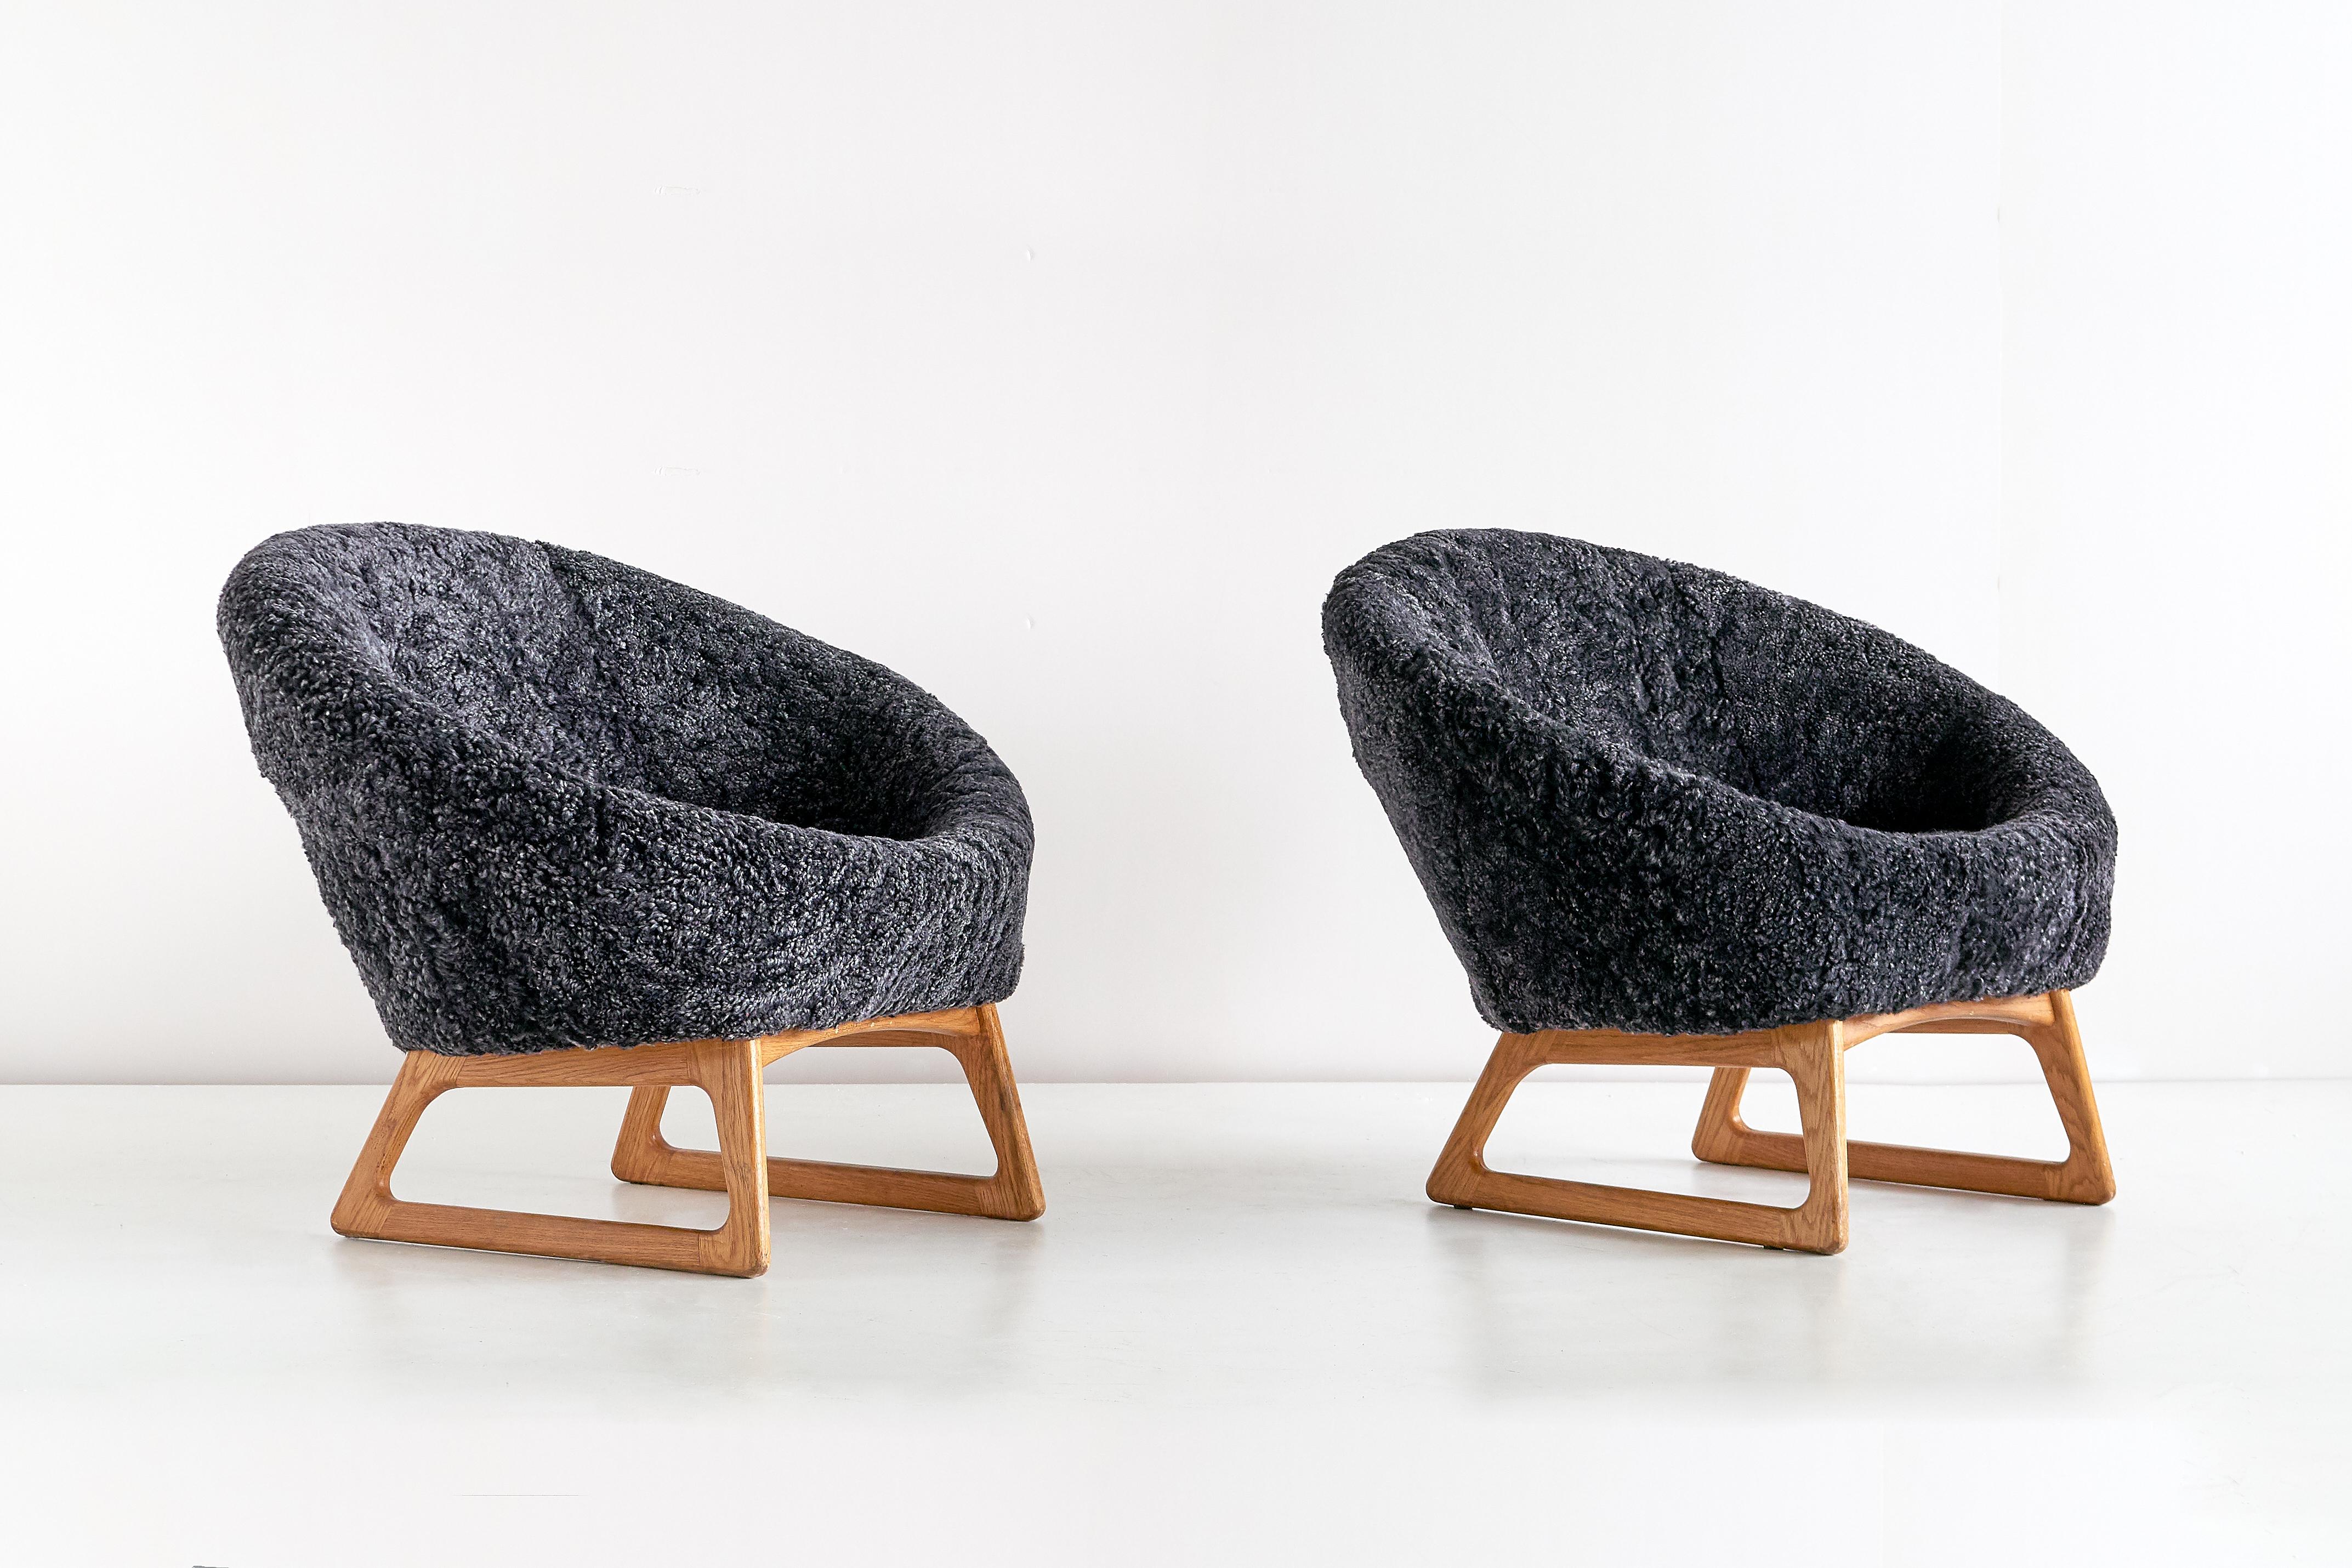 This pair of rare lounge chairs was designed by Kurt Østervig and produced by the Danish manufacturer Rolschau Møbler in 1958. The design is characterized by the round seat shell, mounted on a striking sled like base in stained oak.
The chairs have